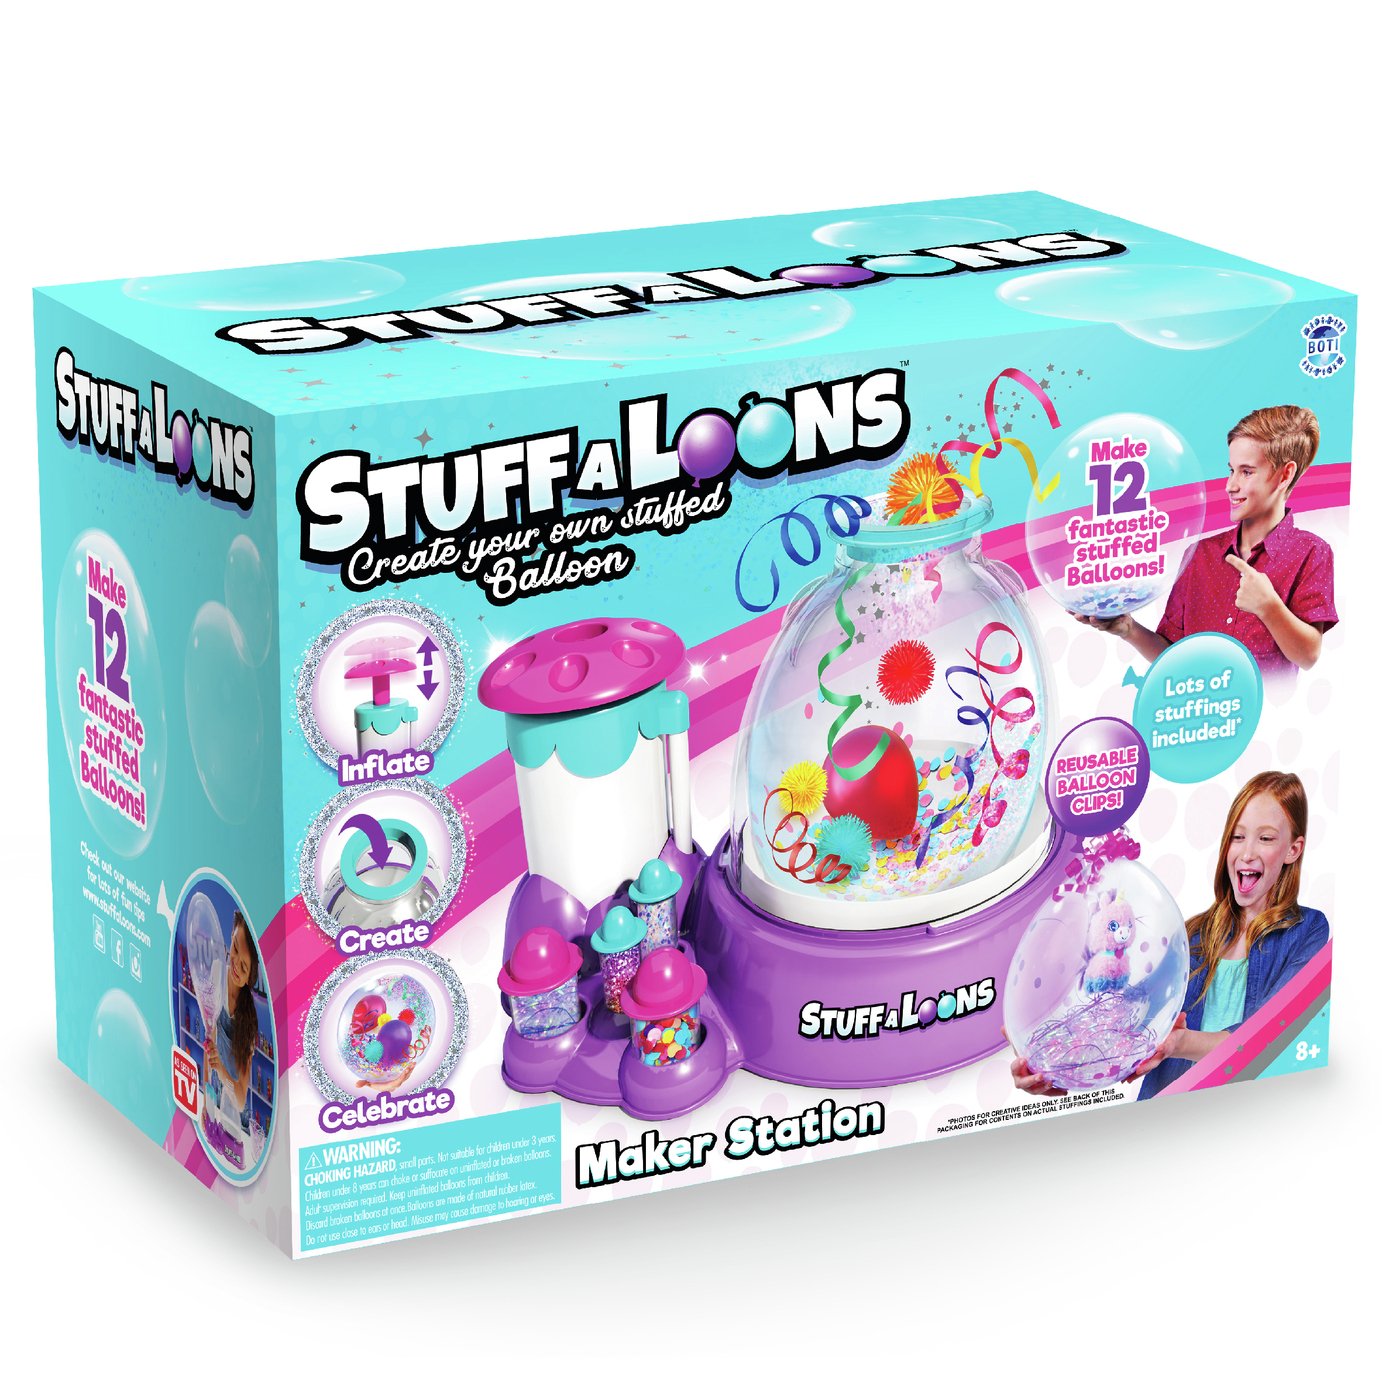 Stuff-A-Loons Maker Station Review